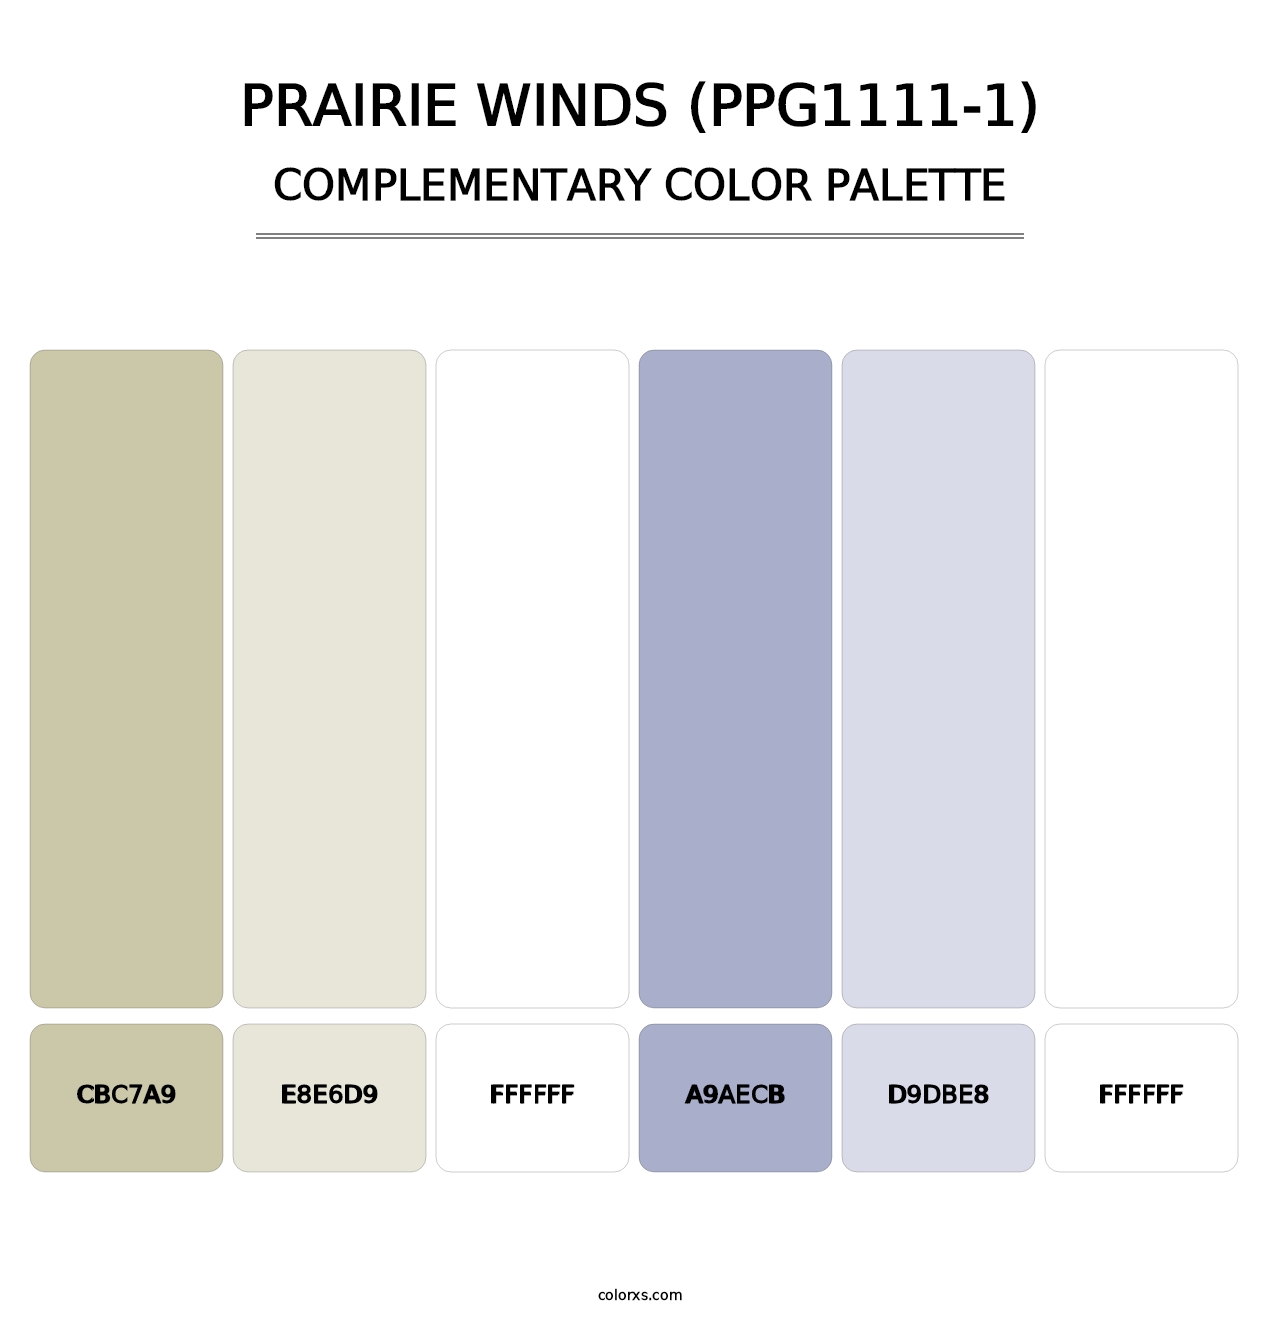 Prairie Winds (PPG1111-1) - Complementary Color Palette